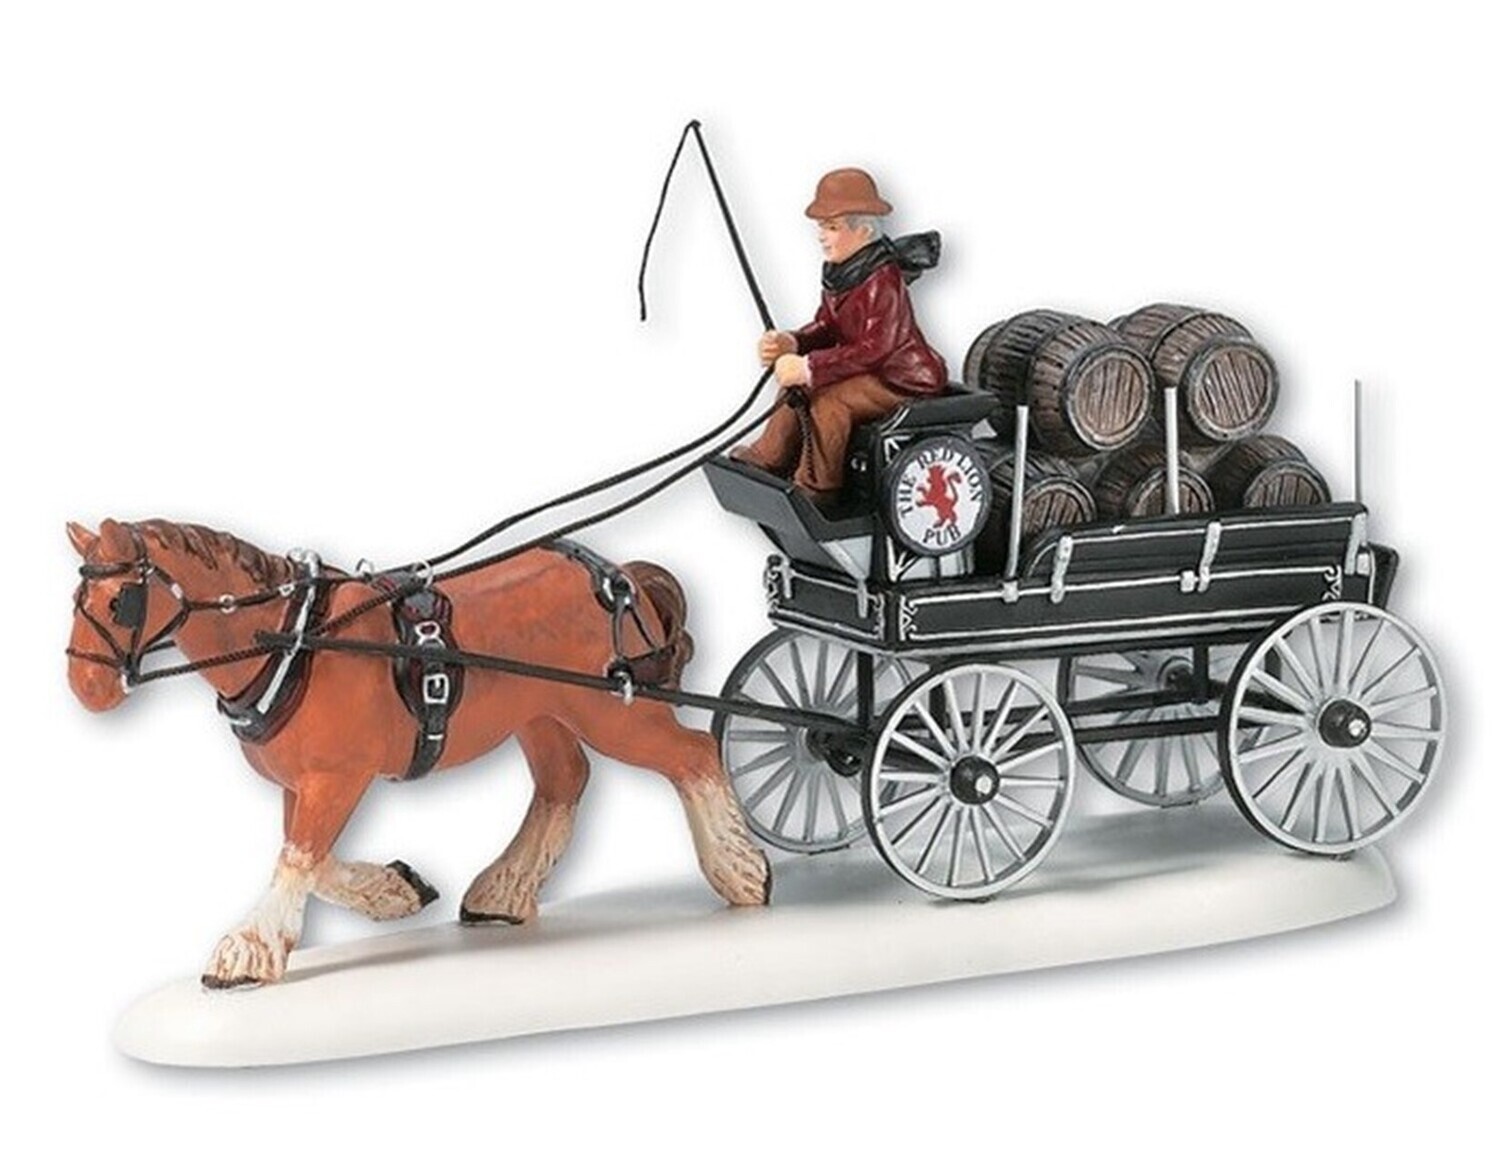 Department 56 Dickens Village "Red Lion Pub Beer Wagon" Horse Drawn Carriage (56.58421)